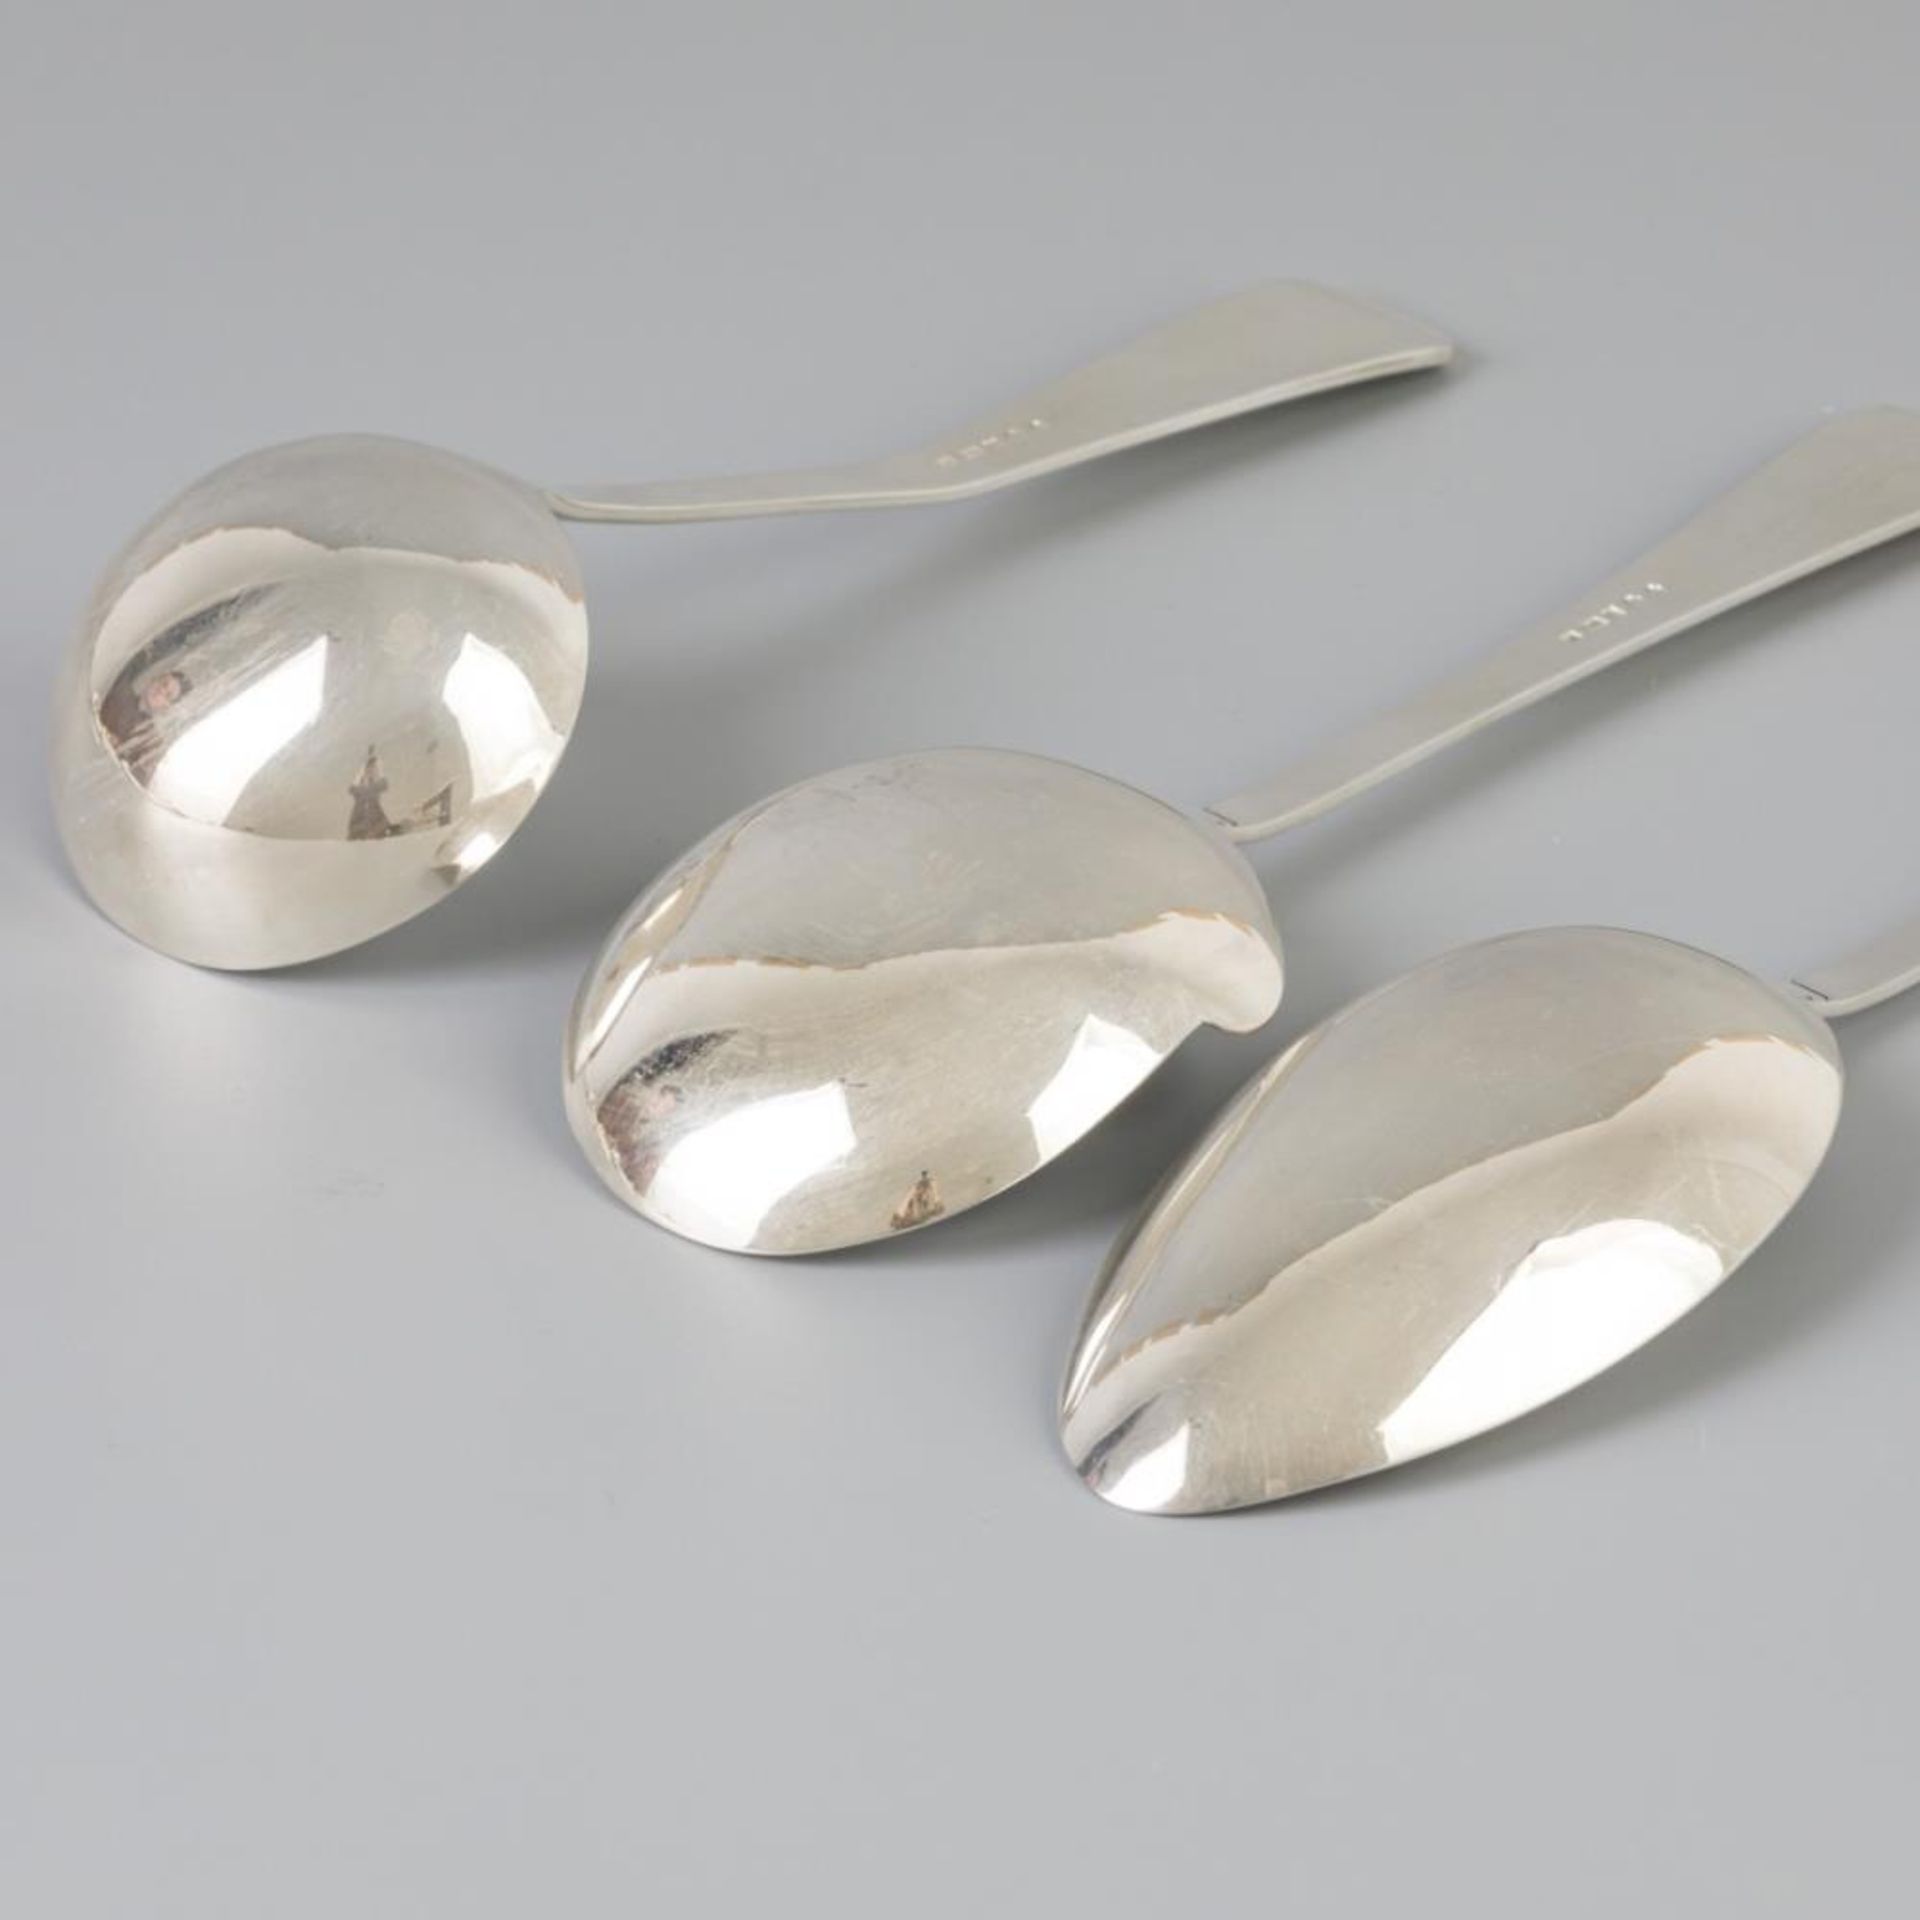 3 piece set of spoons / laddles "Haags Lofje" silver. - Image 4 of 5